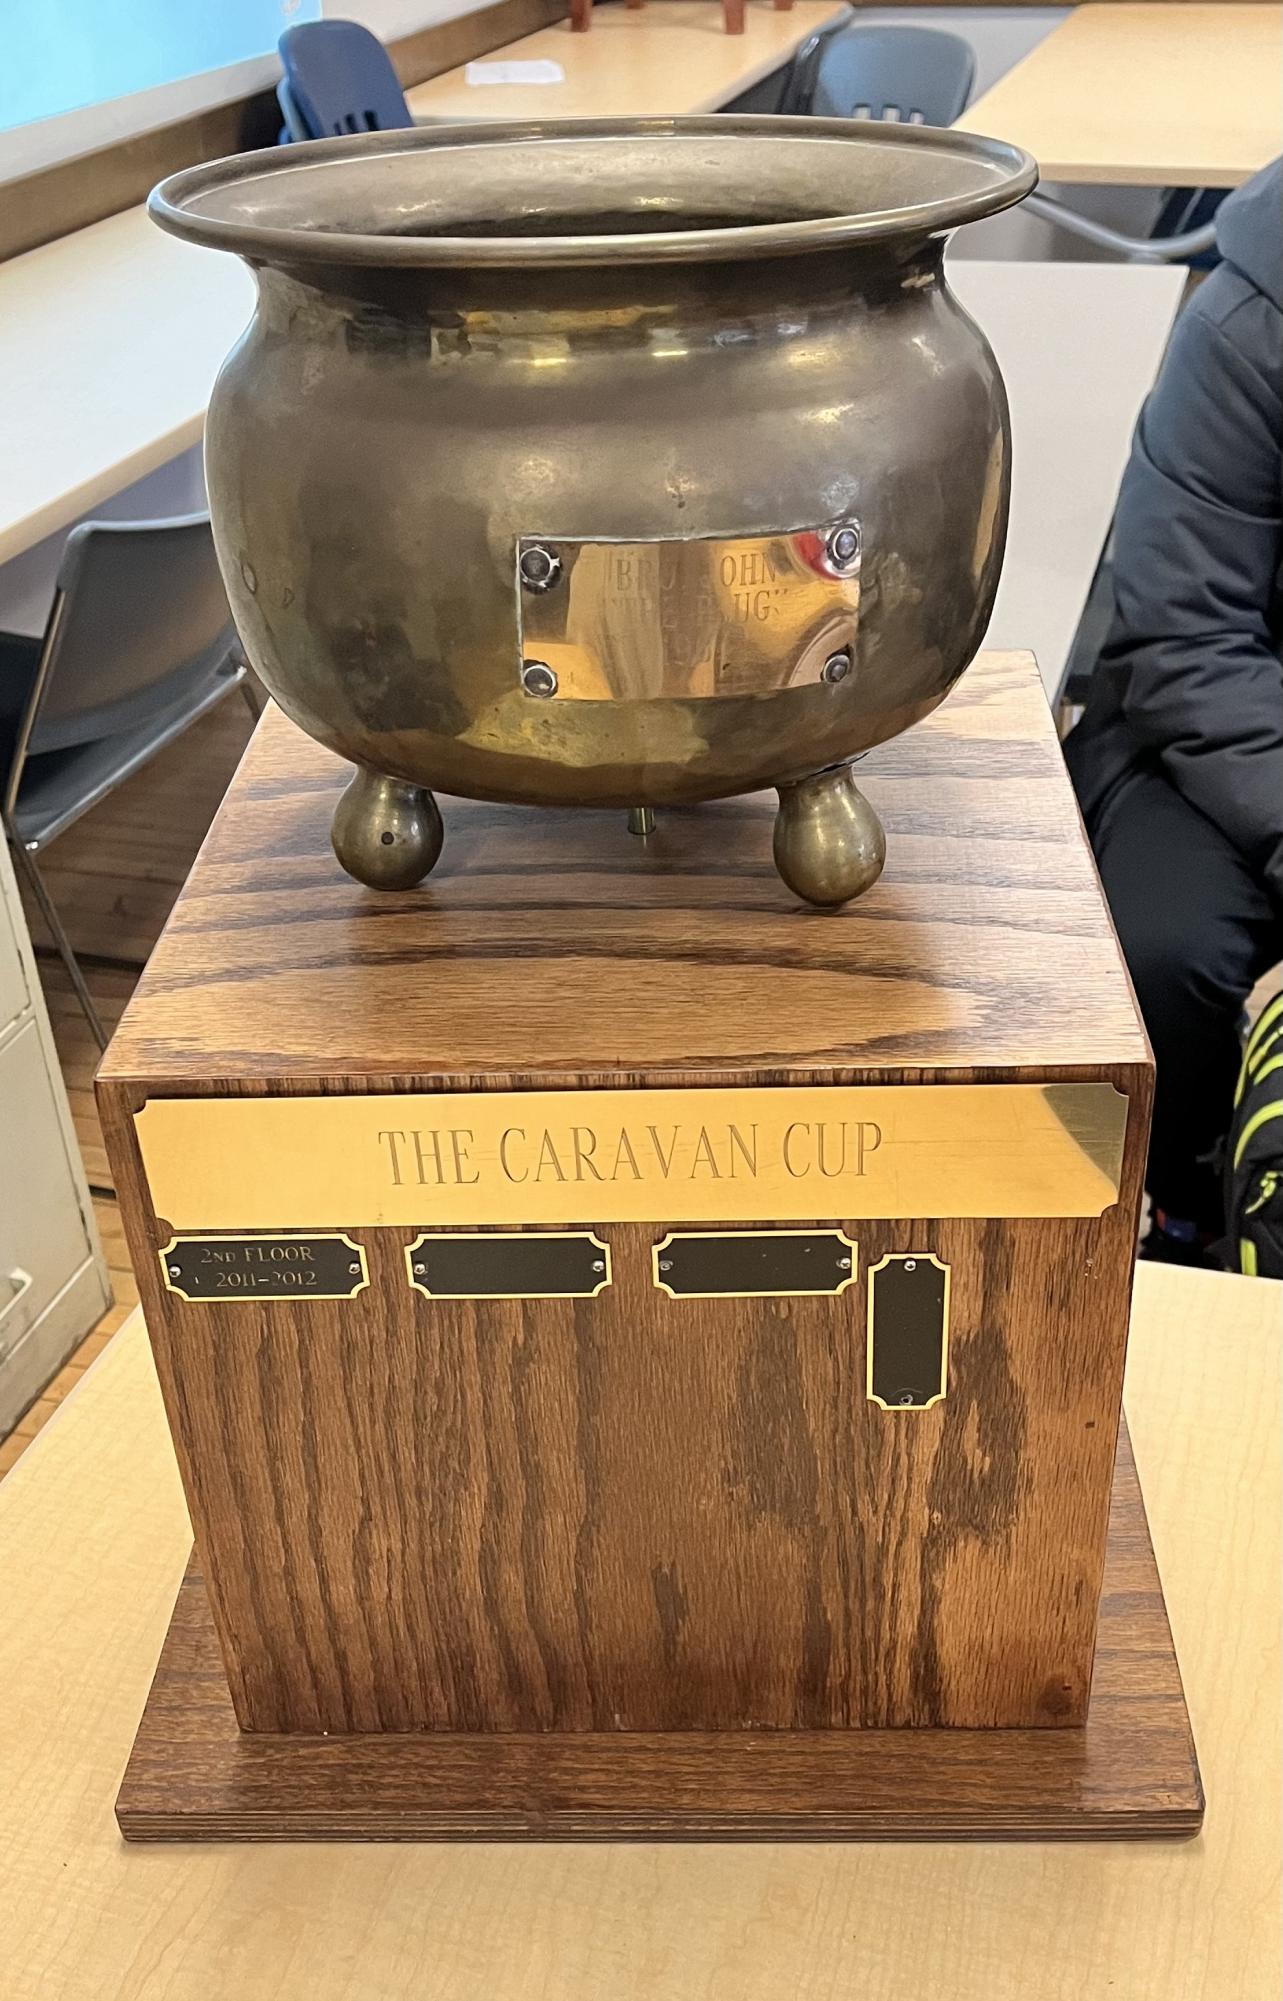 The Caravan Cup trophy with Brother John’s spitoon on top has been dormant in recent years. 
